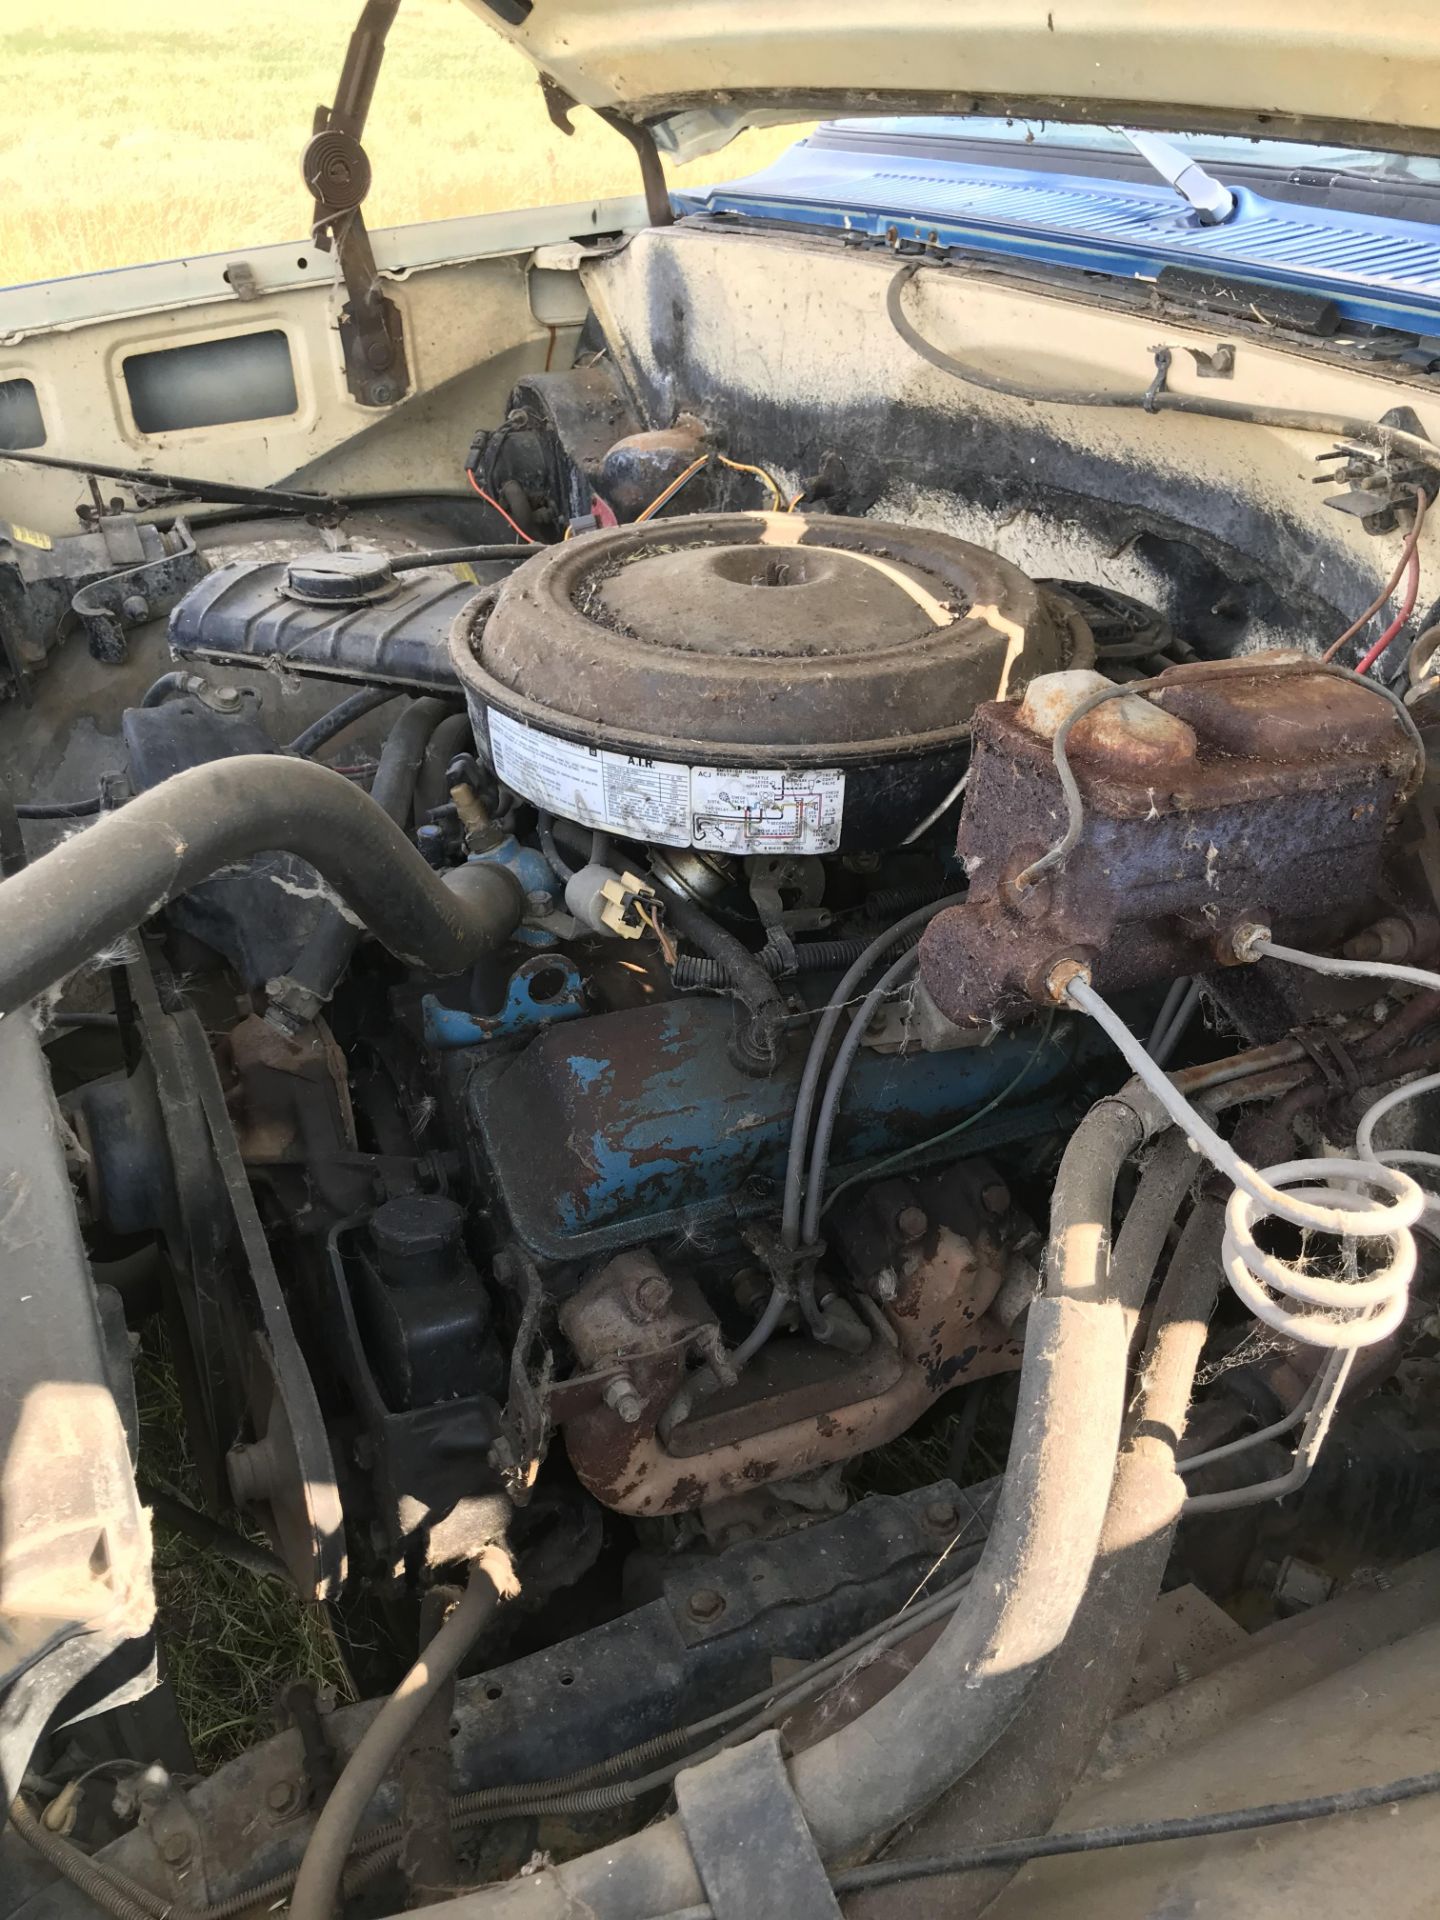 GMC Custom Deluxe 30, blue, 1 ton, 05176 km. NVSN parts only - Image 6 of 6